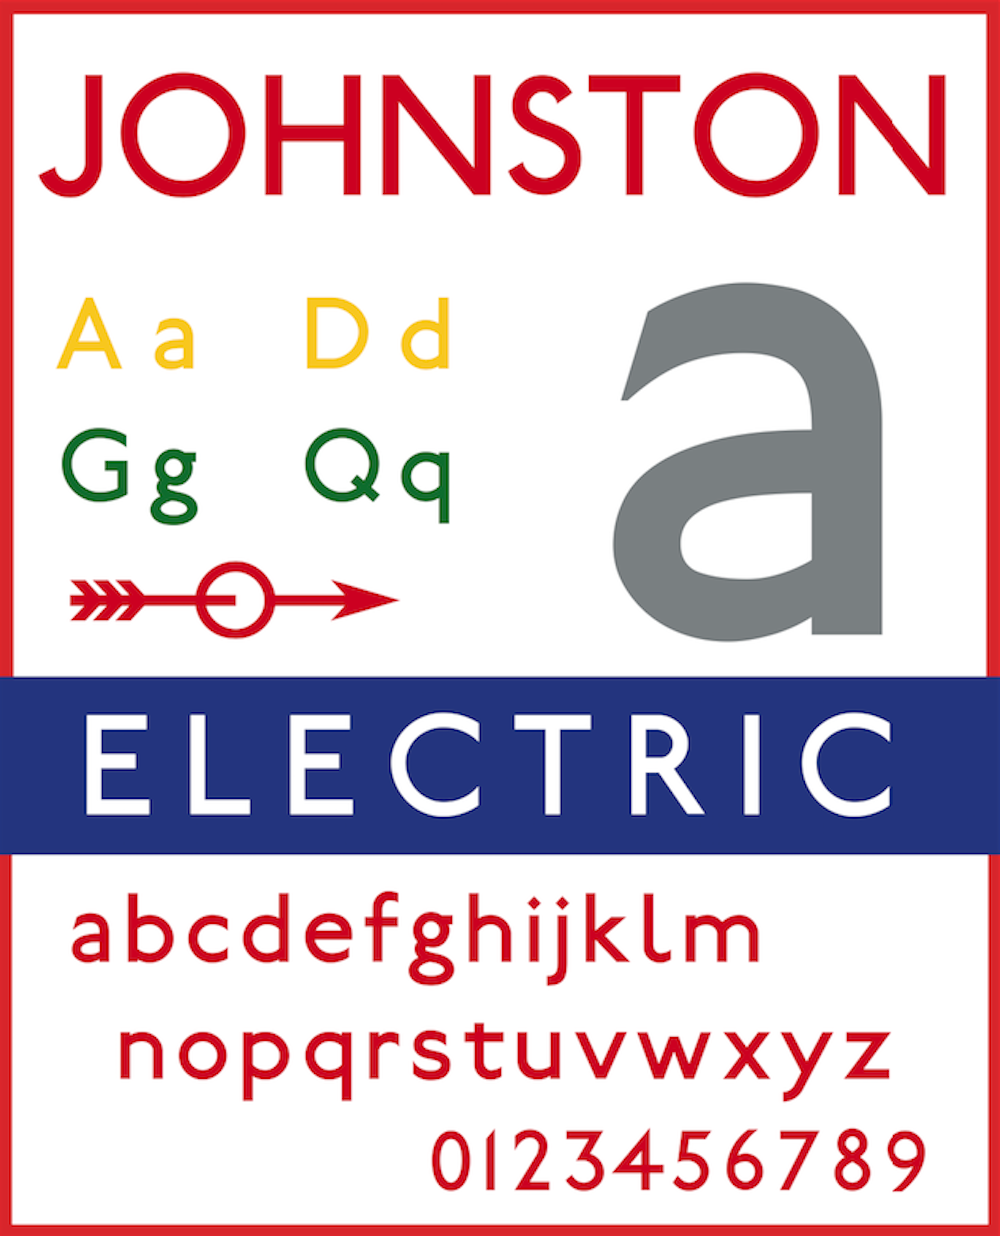 A hundred years of Johnston – the iconic typeface of the London